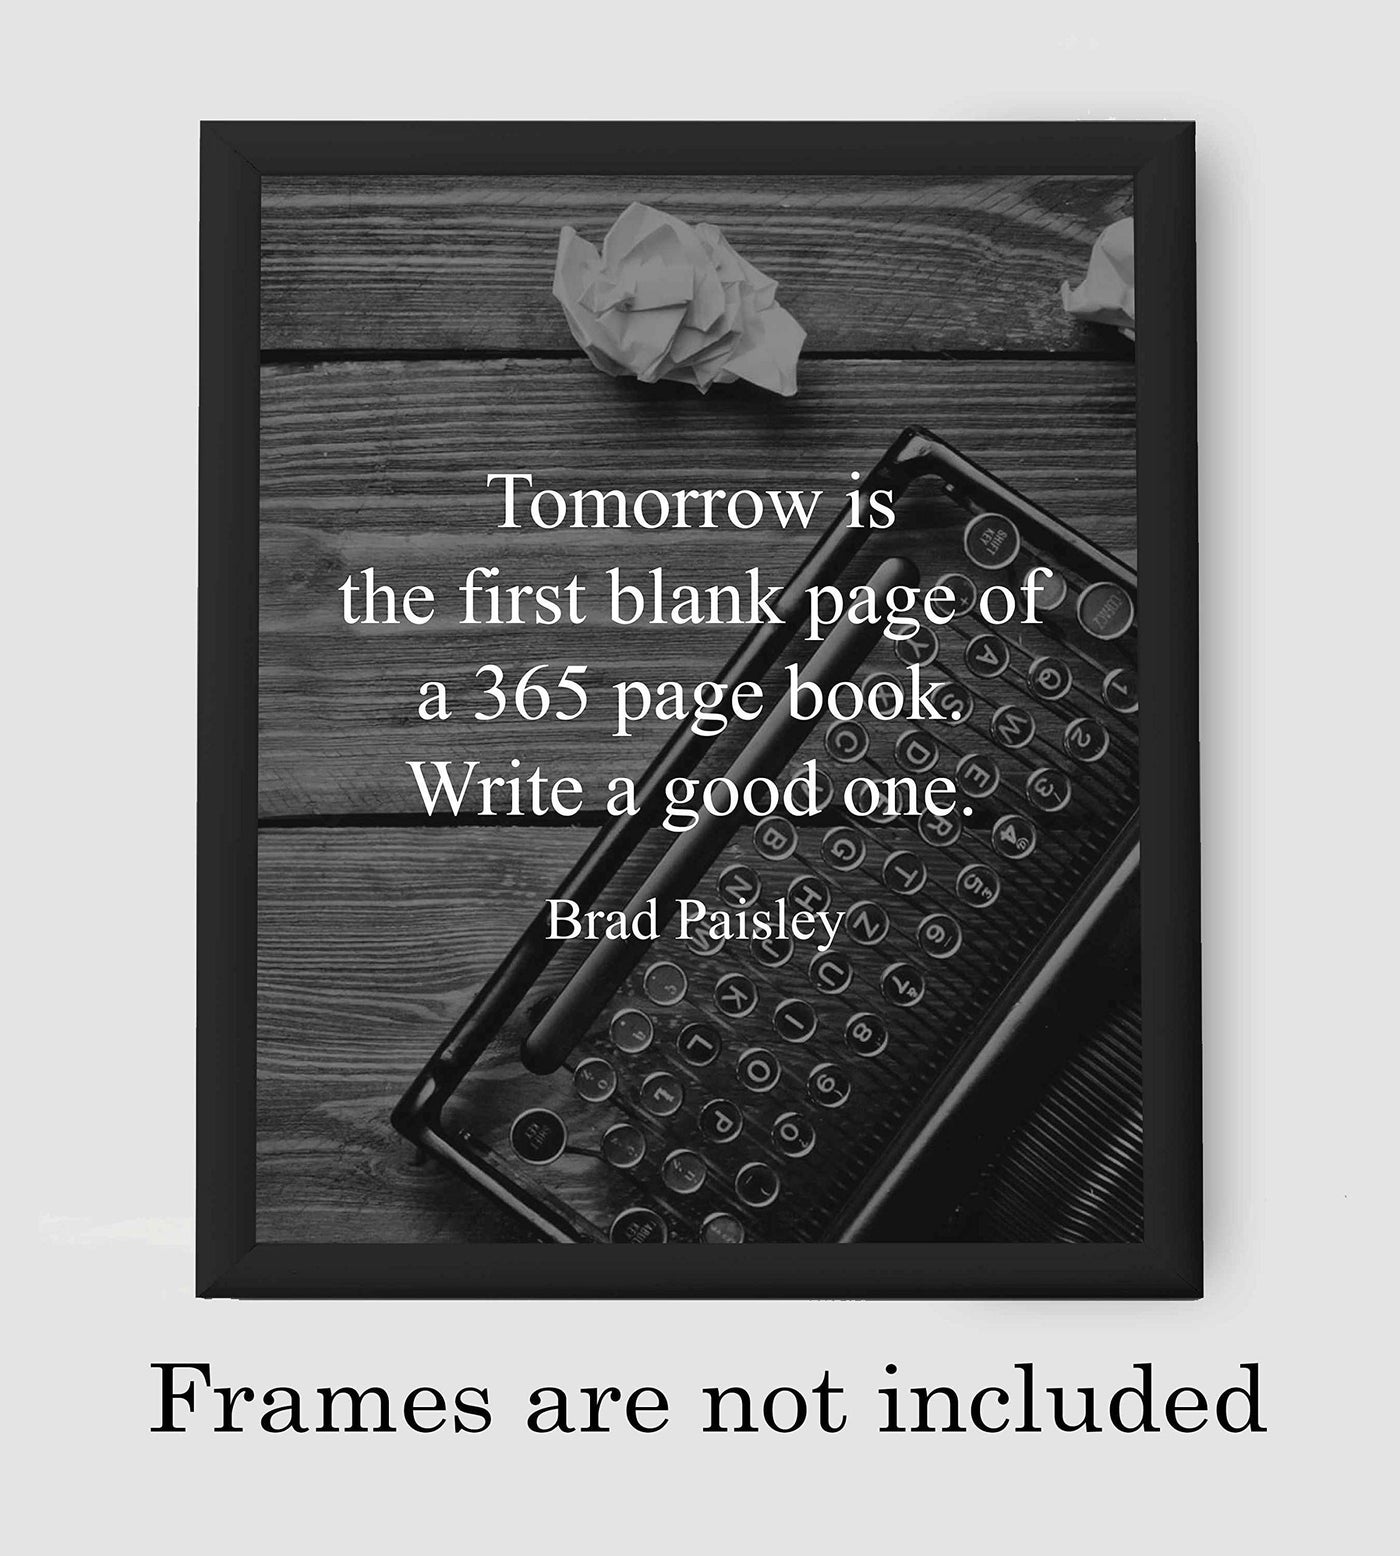 Brad Paisley-"Tomorrow-First Blank Page-365 Page Book"-Inspirational Quotes Wall Art-8 x 10" Motivational Poster Print w/Antique Typewriter Image-Ready to Frame. Perfect Home-Office-Classroom Decor!